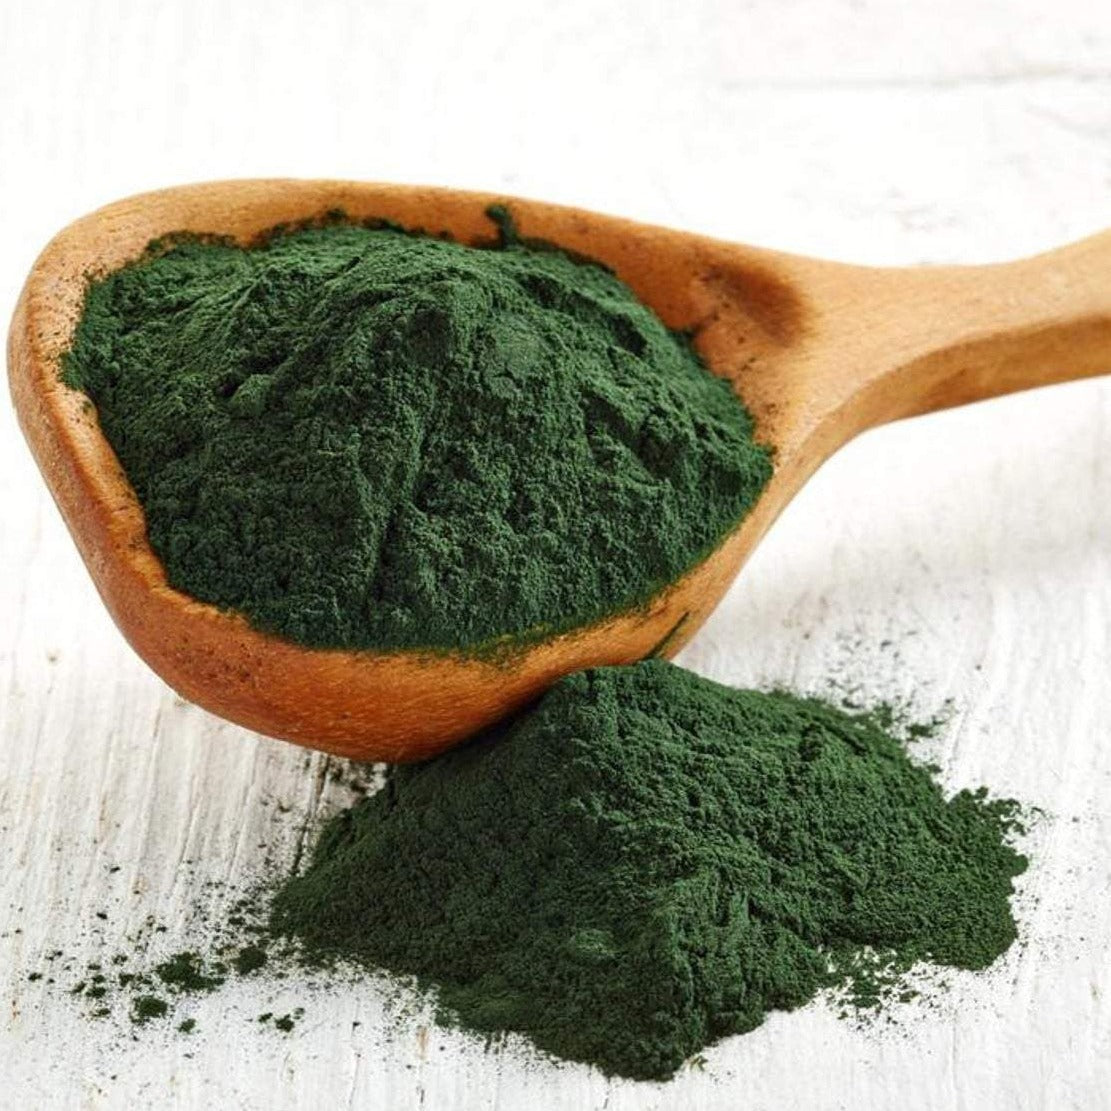 All Things Being Eco - Bulk Spirulina Powder Zero Waste Ingredients All Things Being Eco